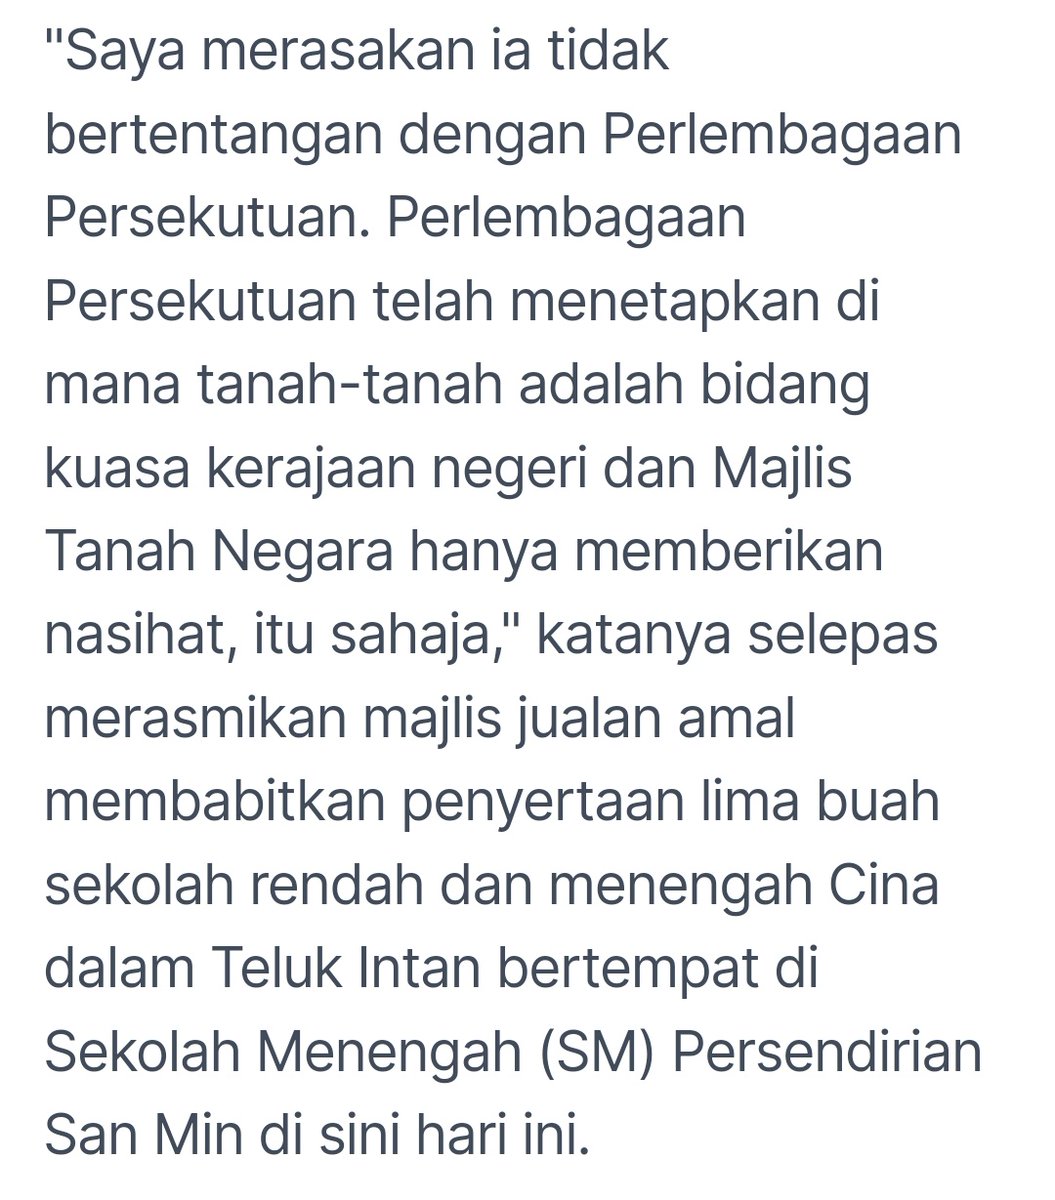 @HarithIskander actually, yes. many of them u can find trying to misuse the power. 
especially the top person.

one of the hundreds example. can just search their name and news.

he feel giving leasing 999 years to non bumi is nt against perlembagaan.